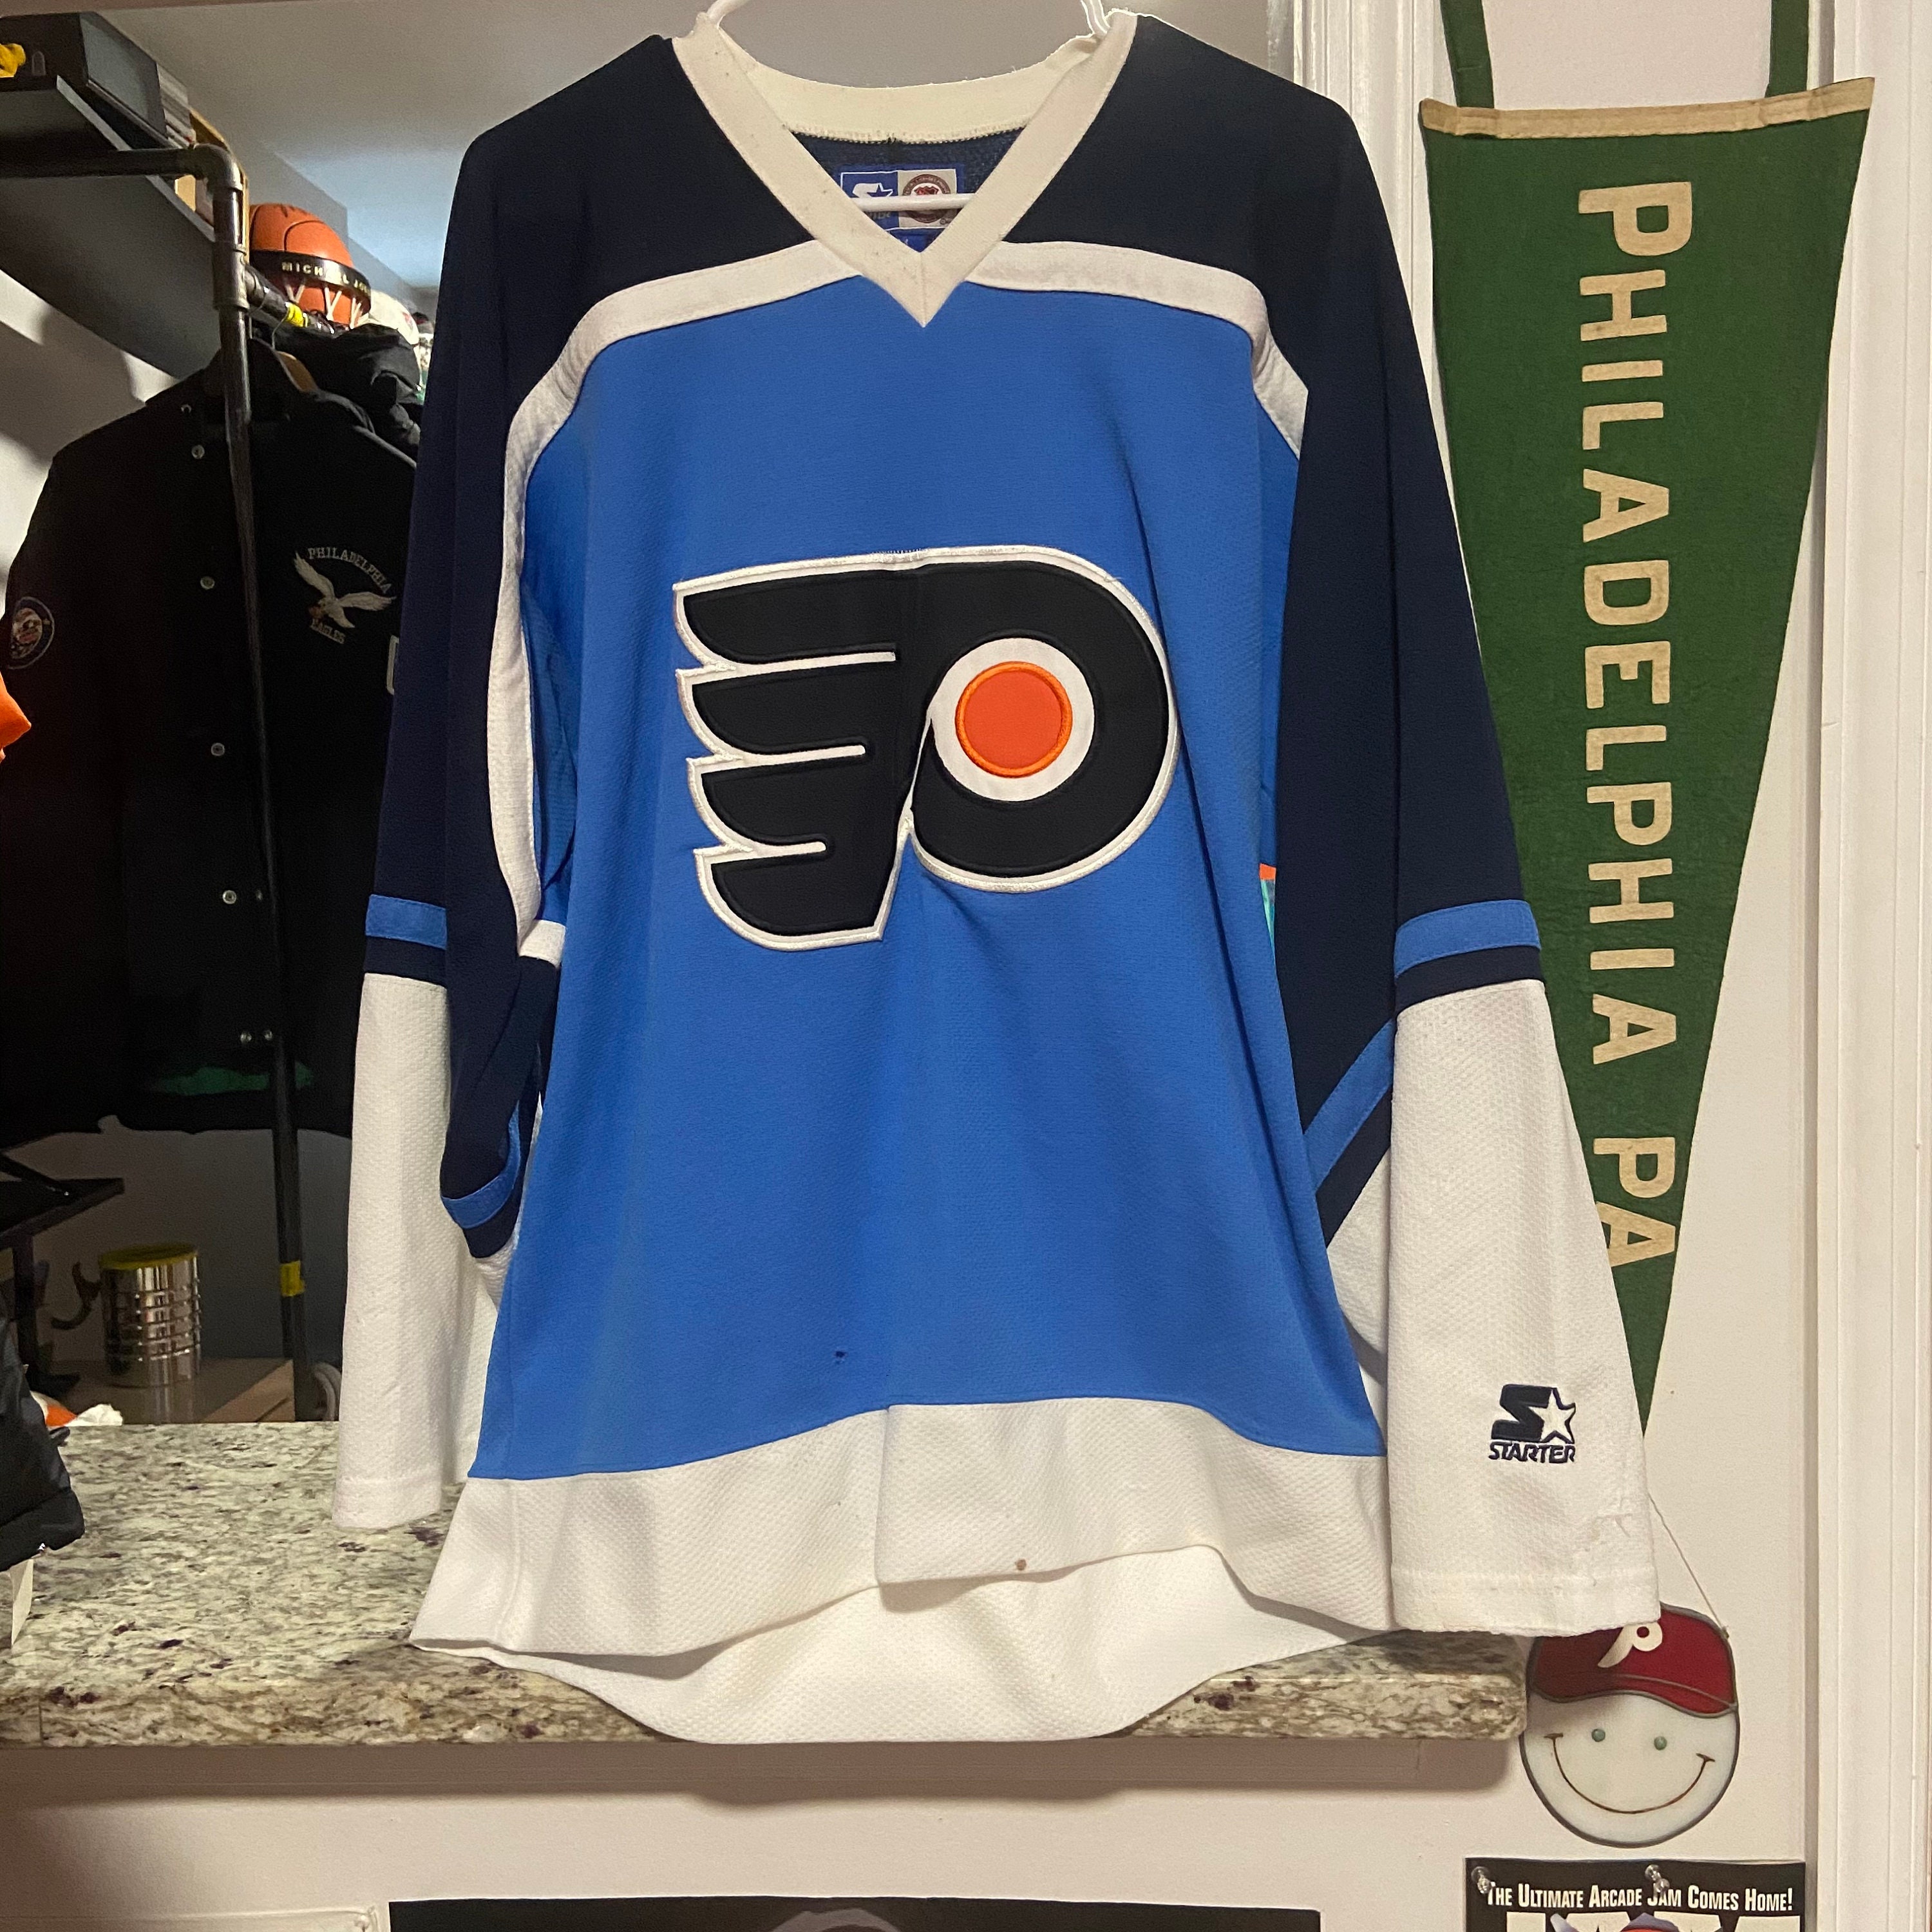 CHECK OUT THE FLYERS NEW JERSEY, A THROWBACK TO THE '80S!